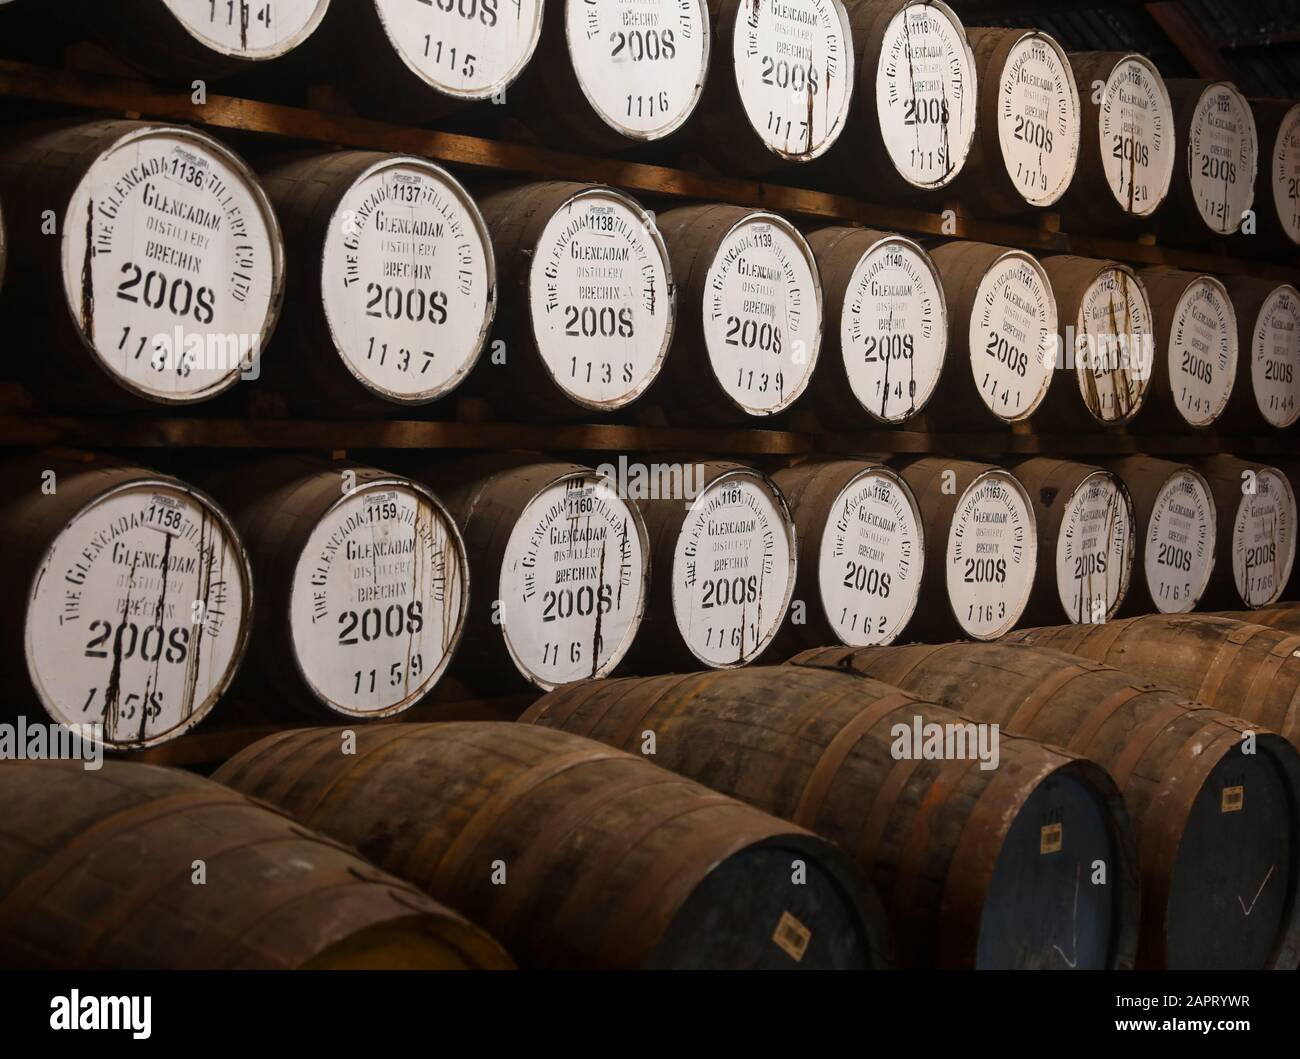 Whisky maturing in barrels stowed at Glencadam distillery which first opened in 1825, in the ancient city of Brechin, Angus, Scotland Stock Photo